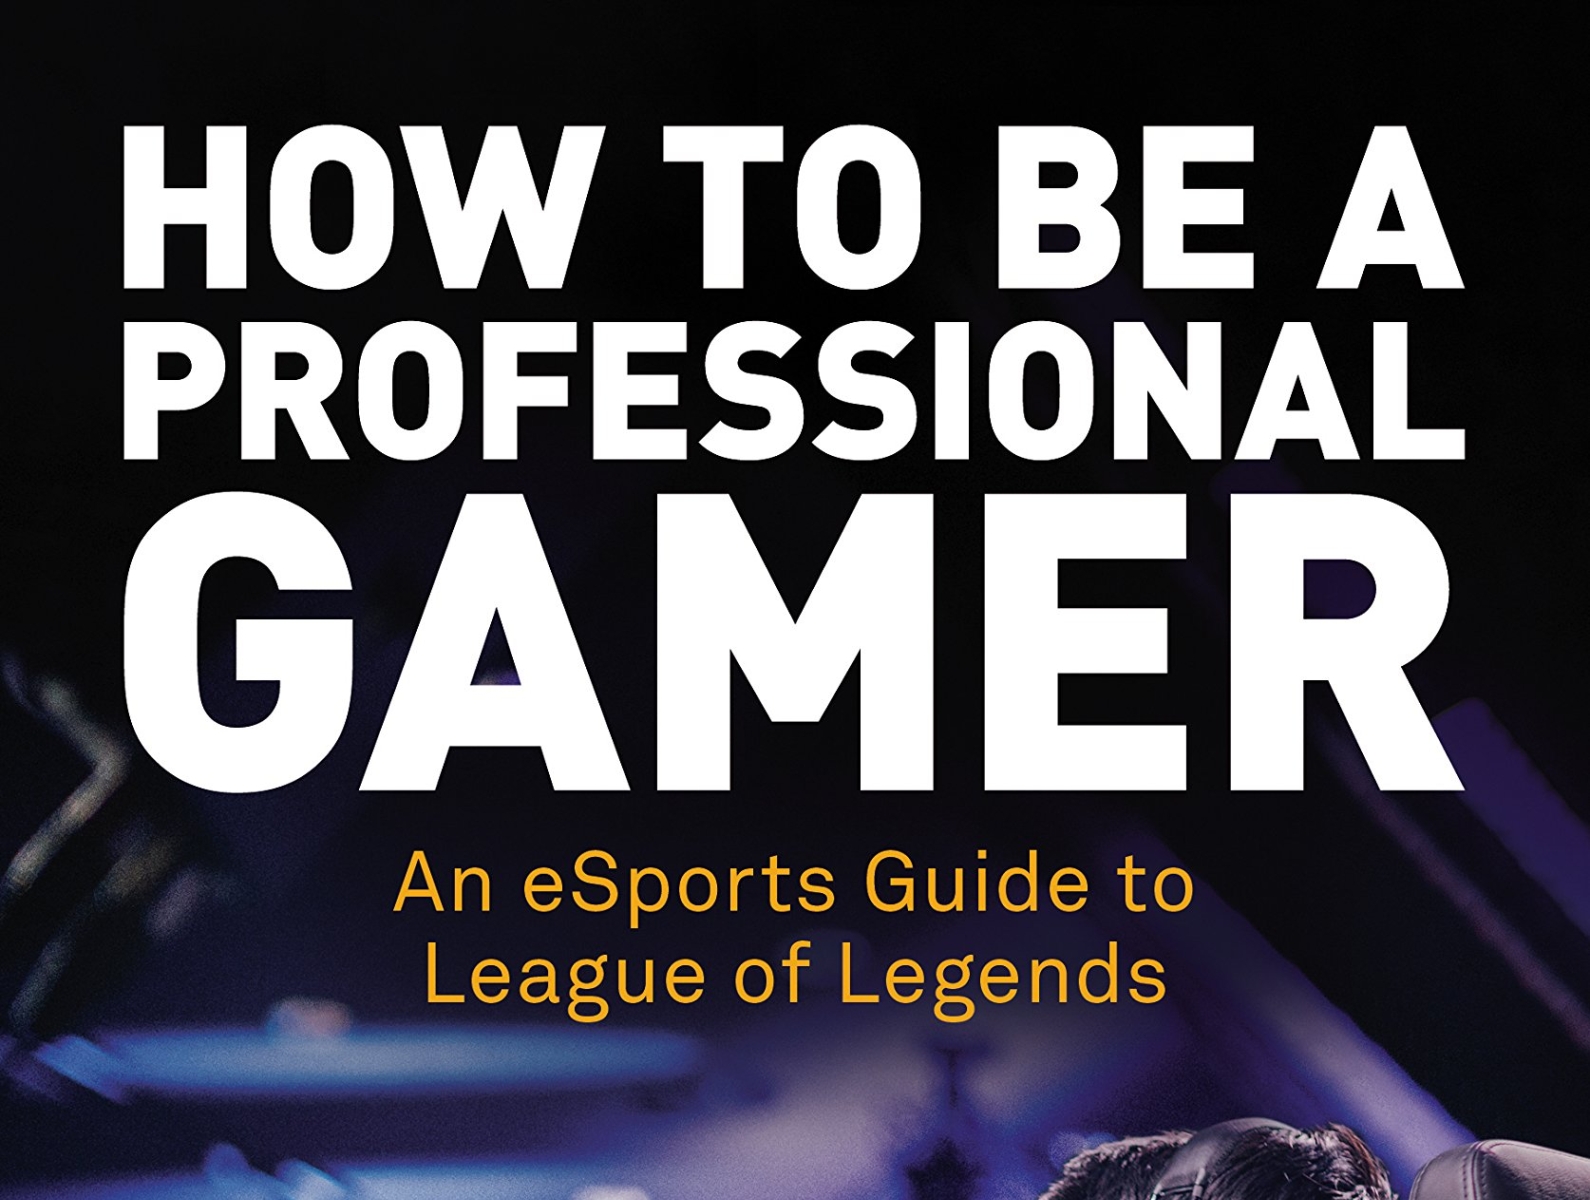 How to Become a Professional Gamer 